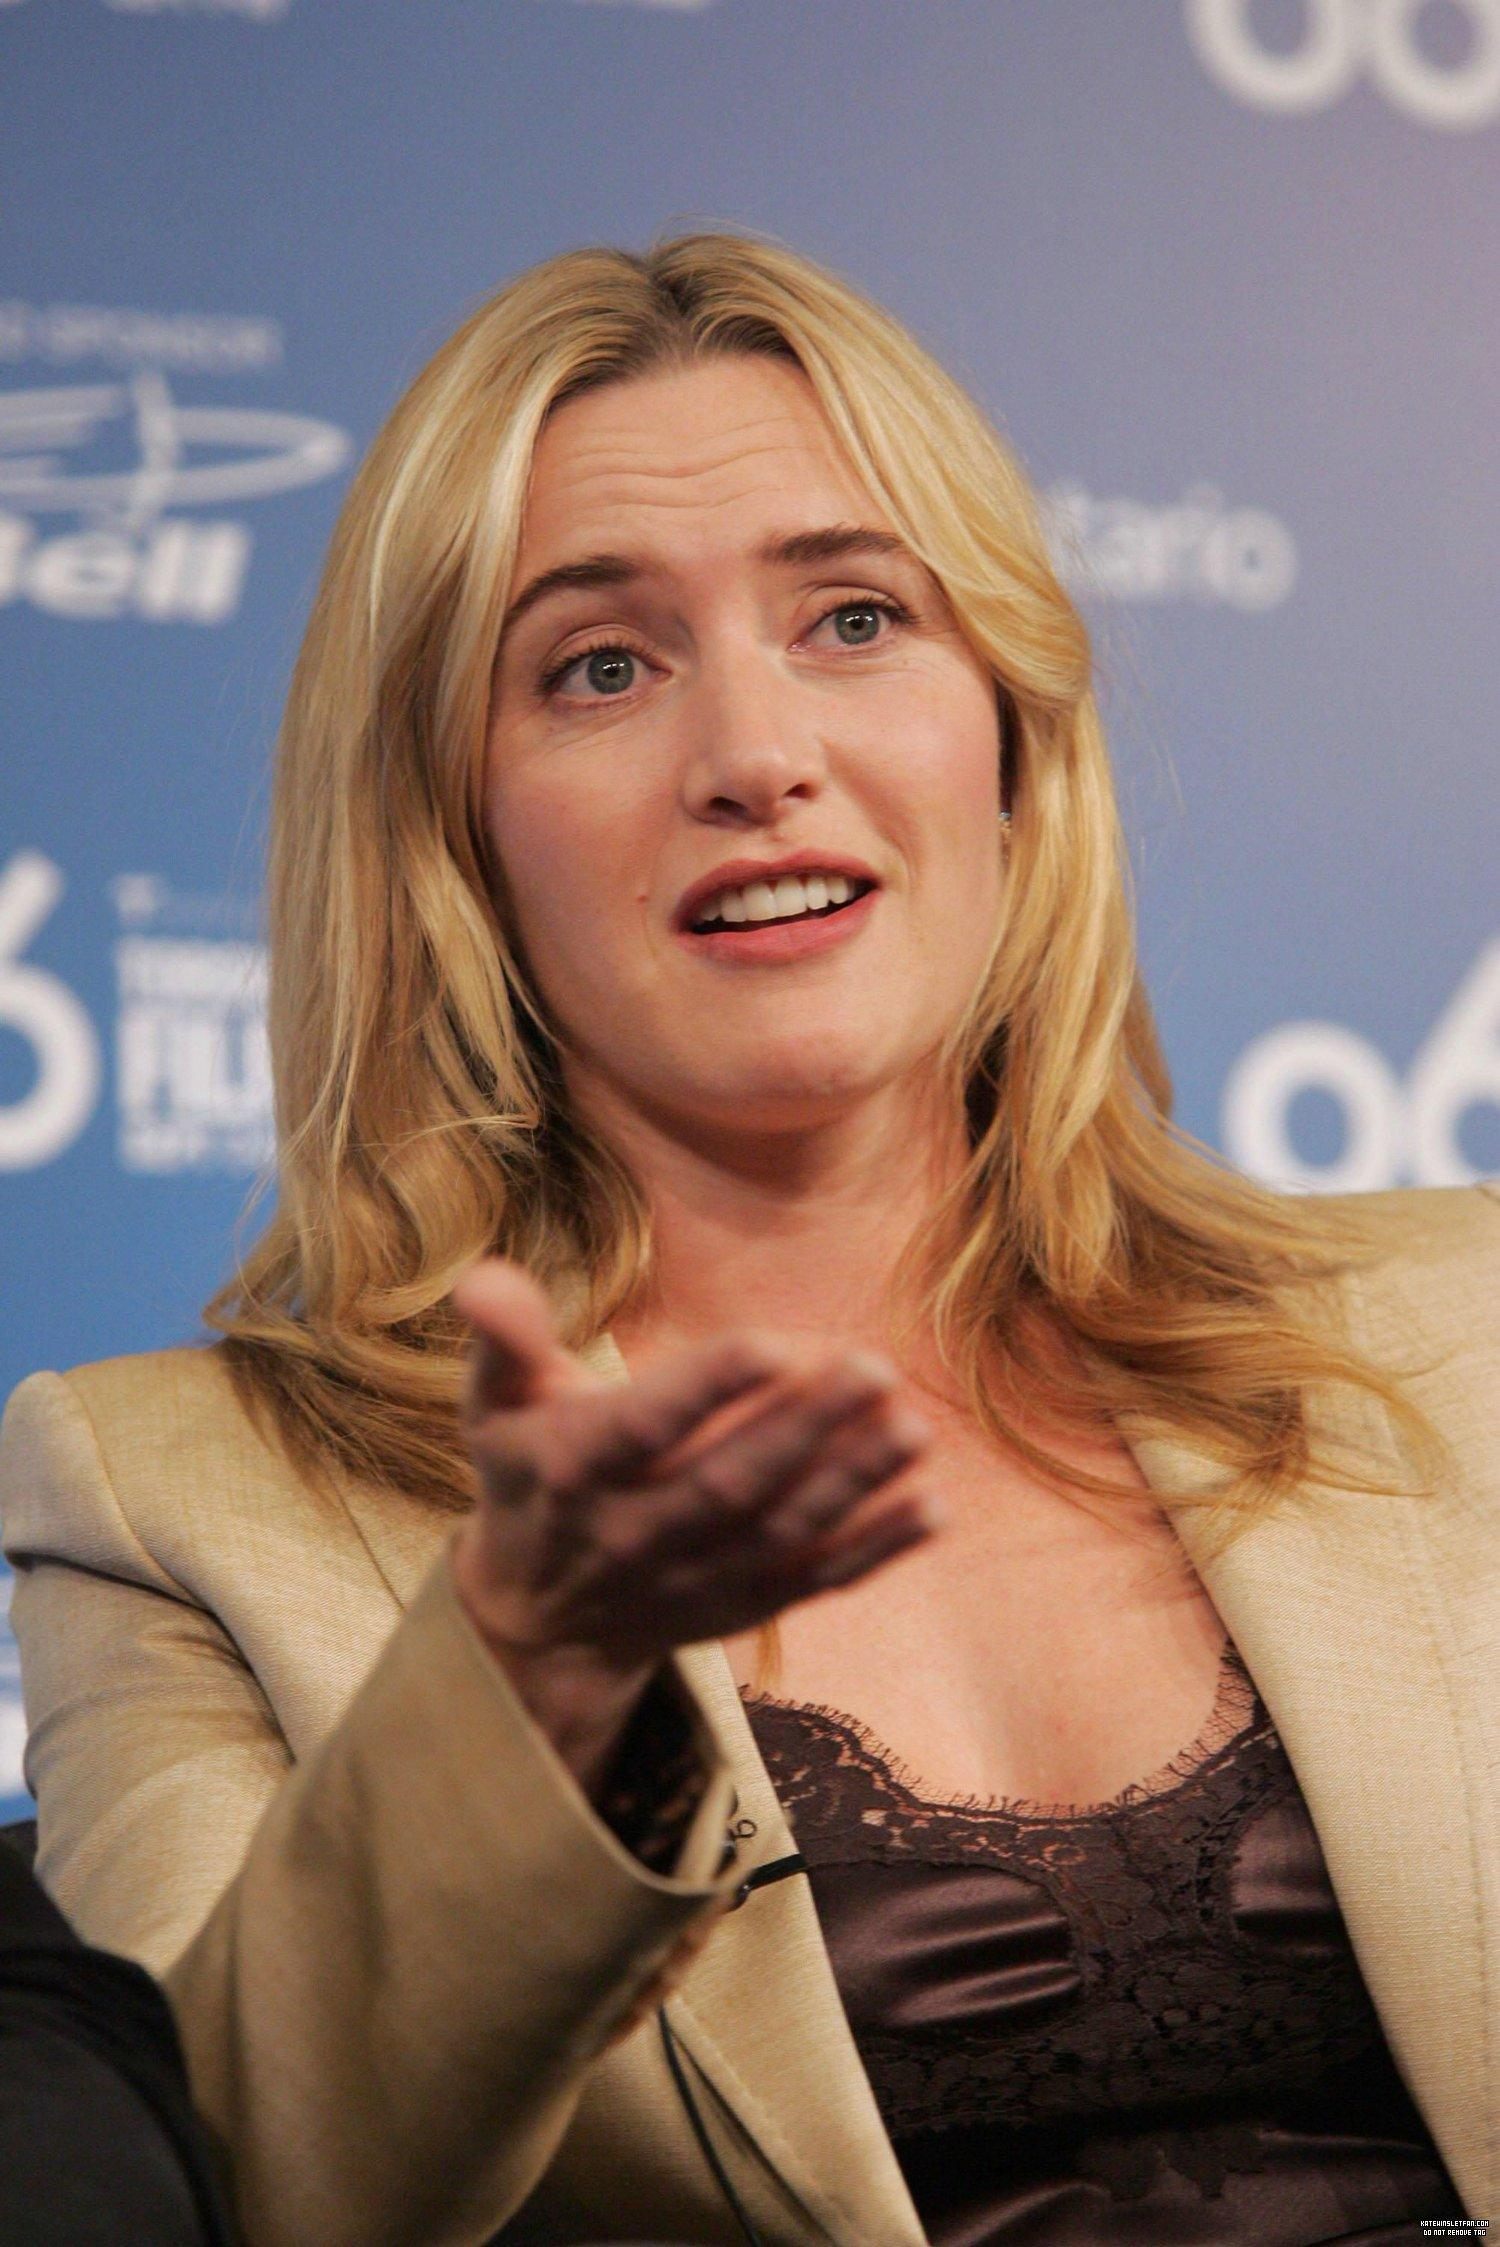 31st-annual-tiff_all-the-kings-men-press-conference_017.jpg